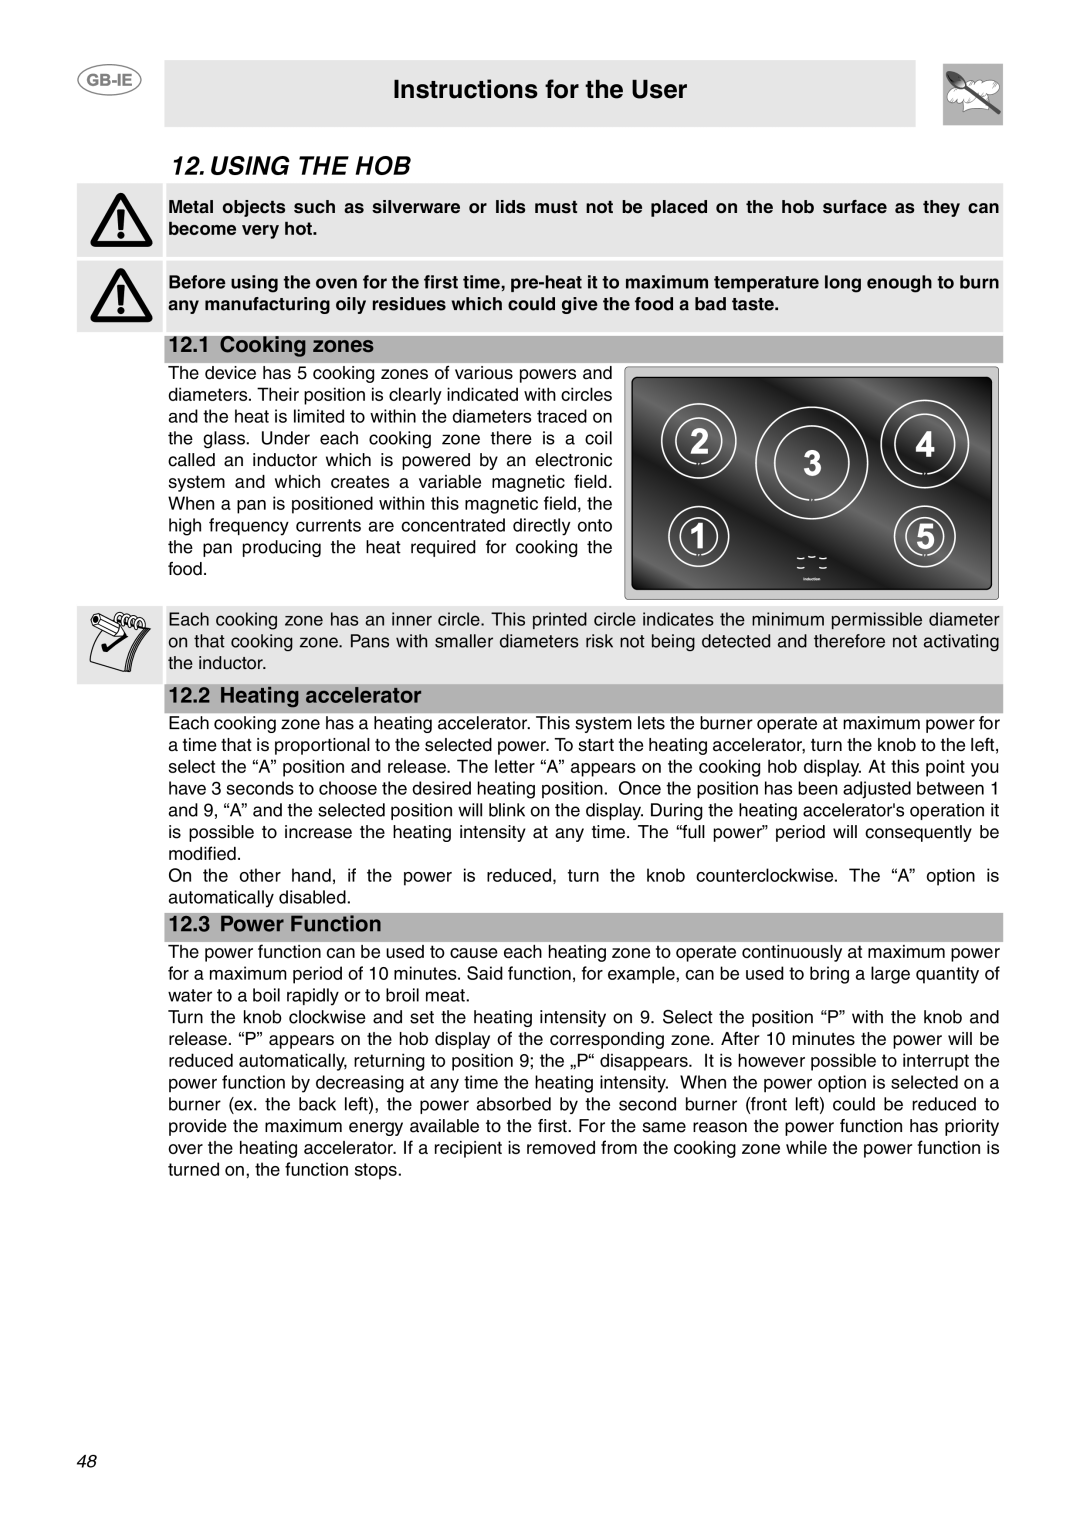 Smeg CE9IMX manual Using The Hob, Cooking zones, Heating accelerator, Power Function, Instructions for the User 